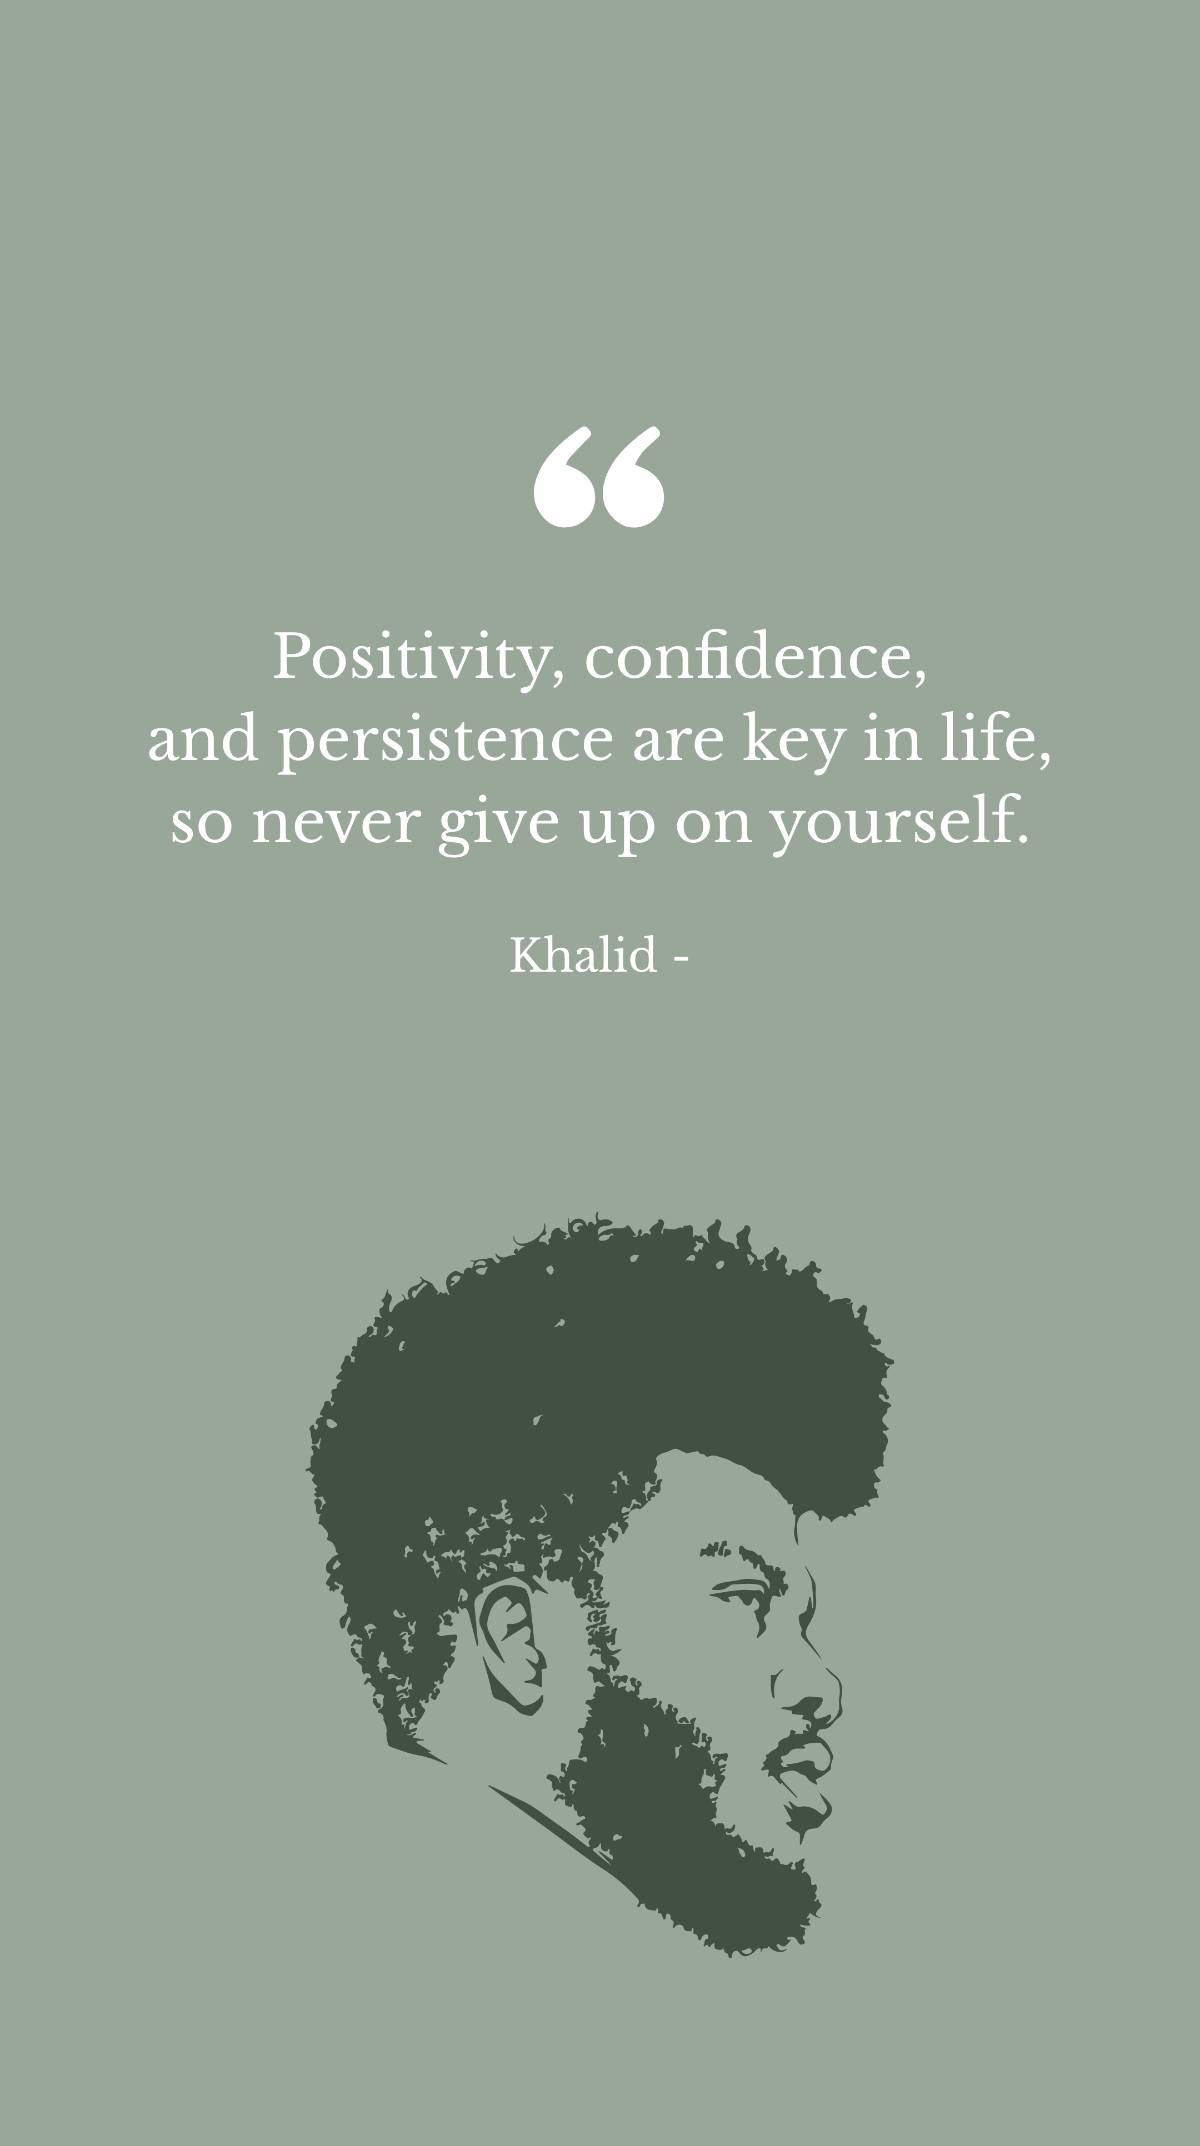 Free Khalid - Positivity, confidence, and persistence are key in life, so never give up on yourself. Template